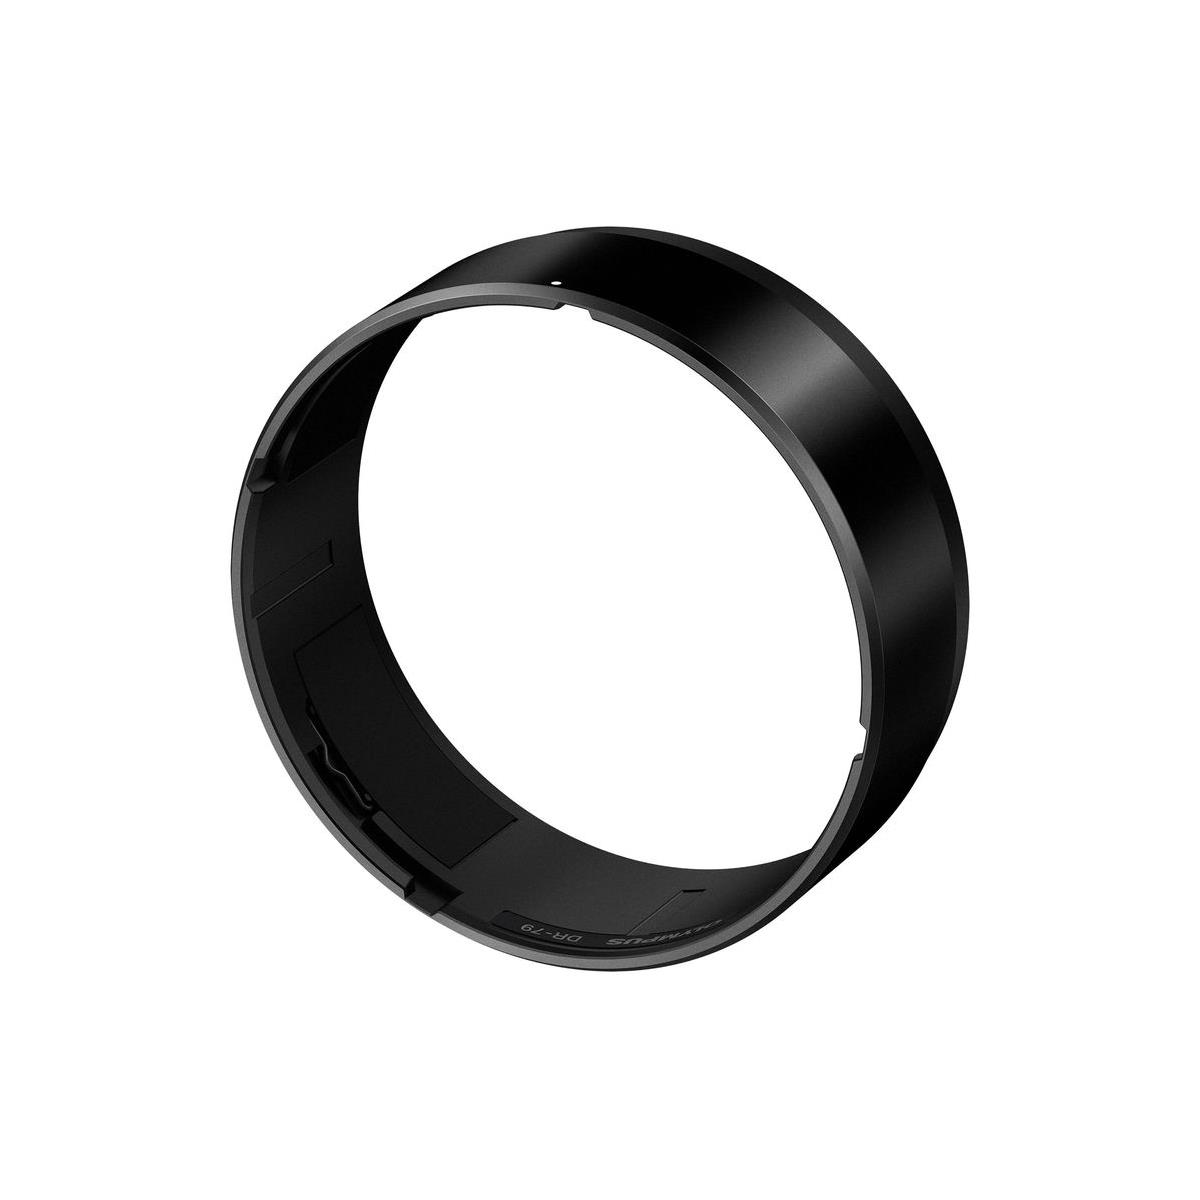 

Olympus Replacement Decoration Ring for the M. Zuiko ED 300mm f4.0 PRO Lens